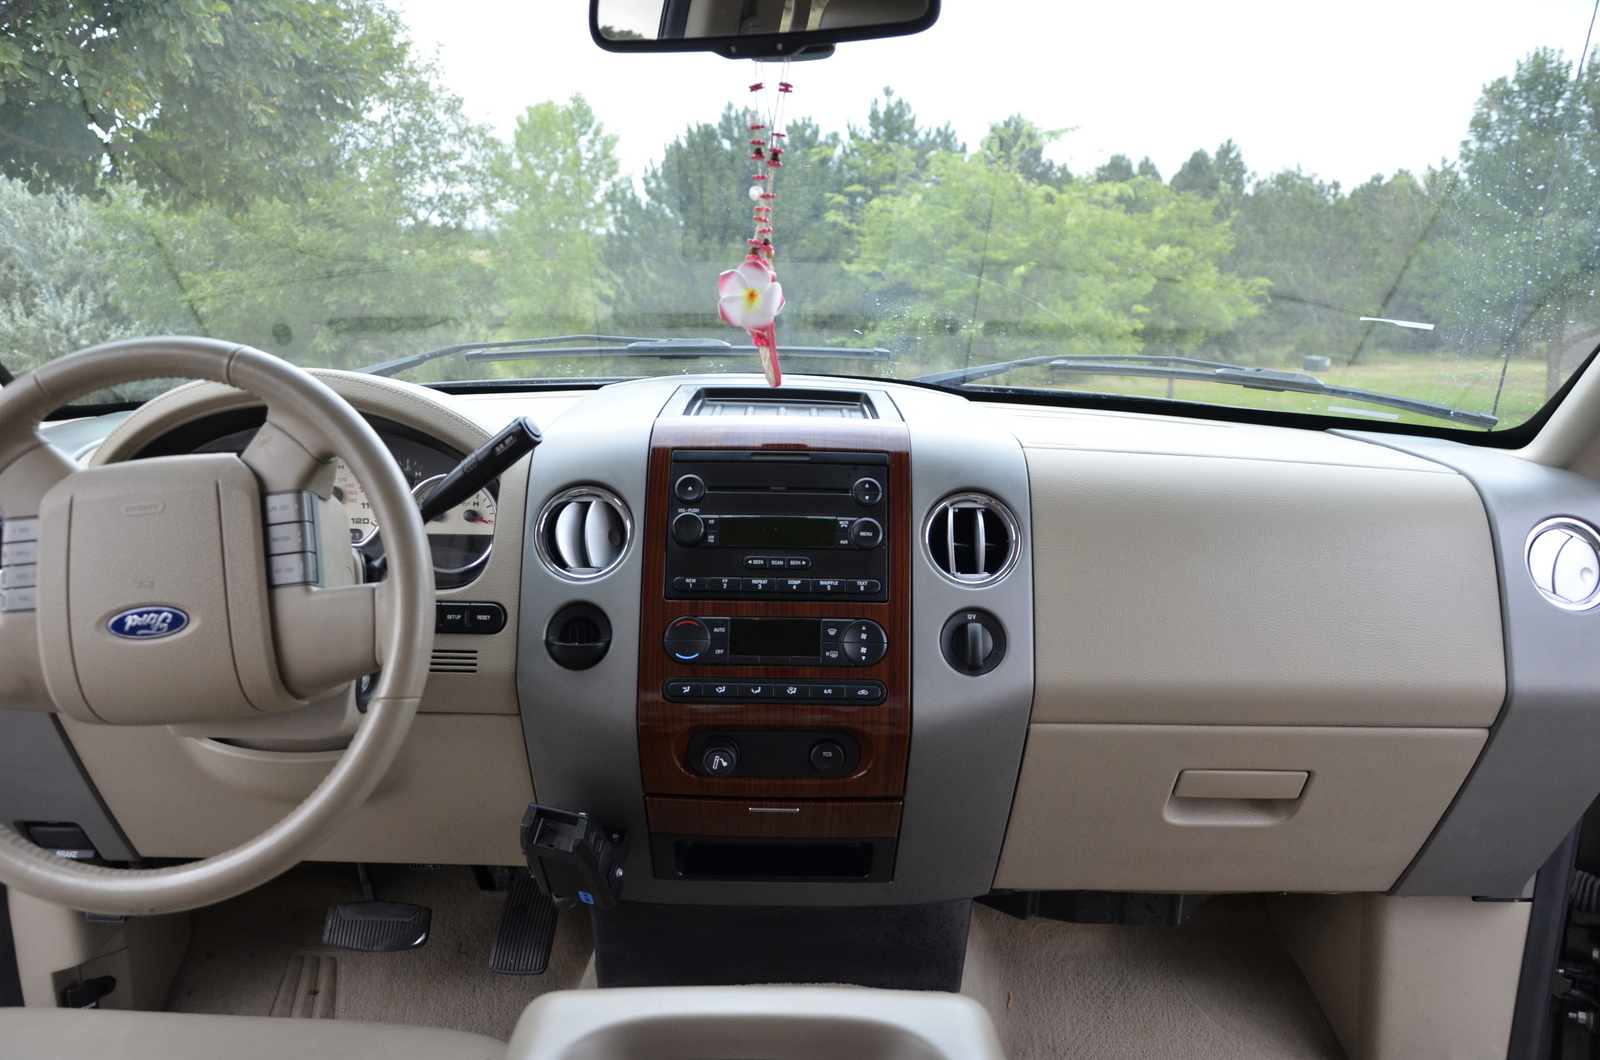 2006 Ford f150 supercrew lariat review